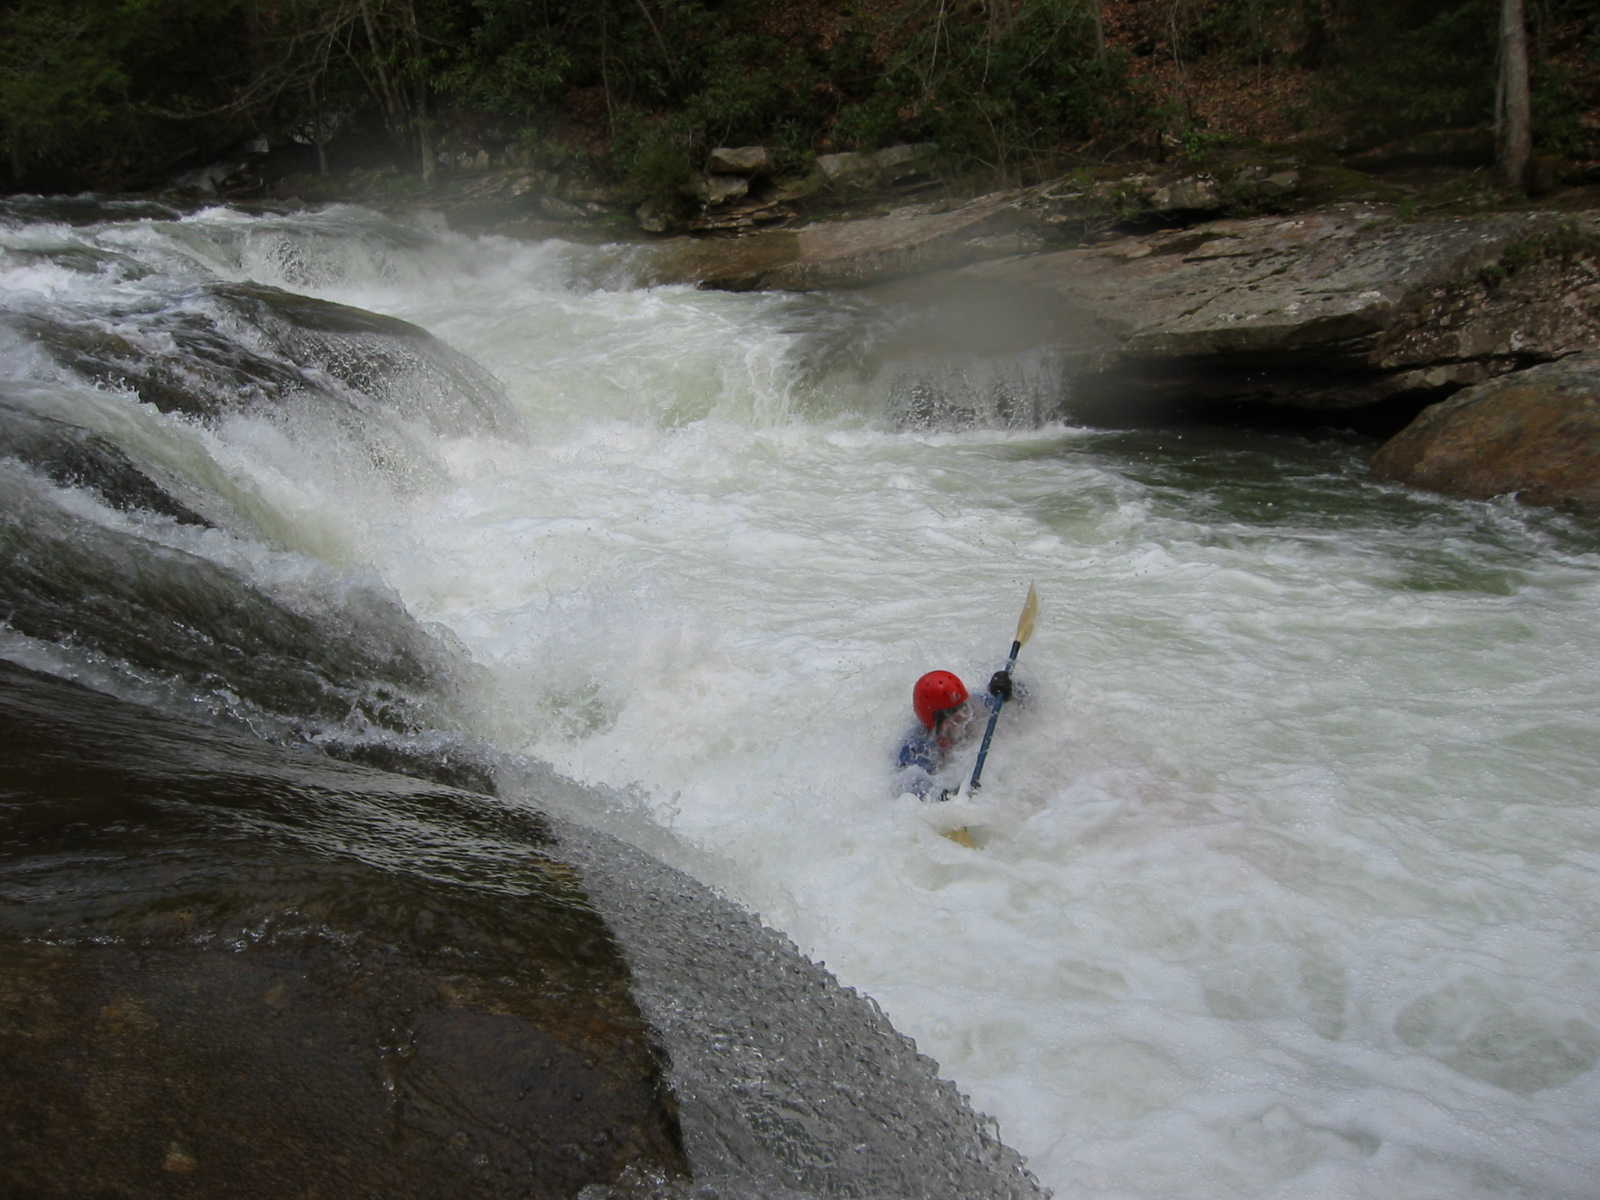 Bob Maxey at bottom of first of the Three Falls a.k.a. Lunch Ledge (Photo by Scott Gravatt - 4/27/04)